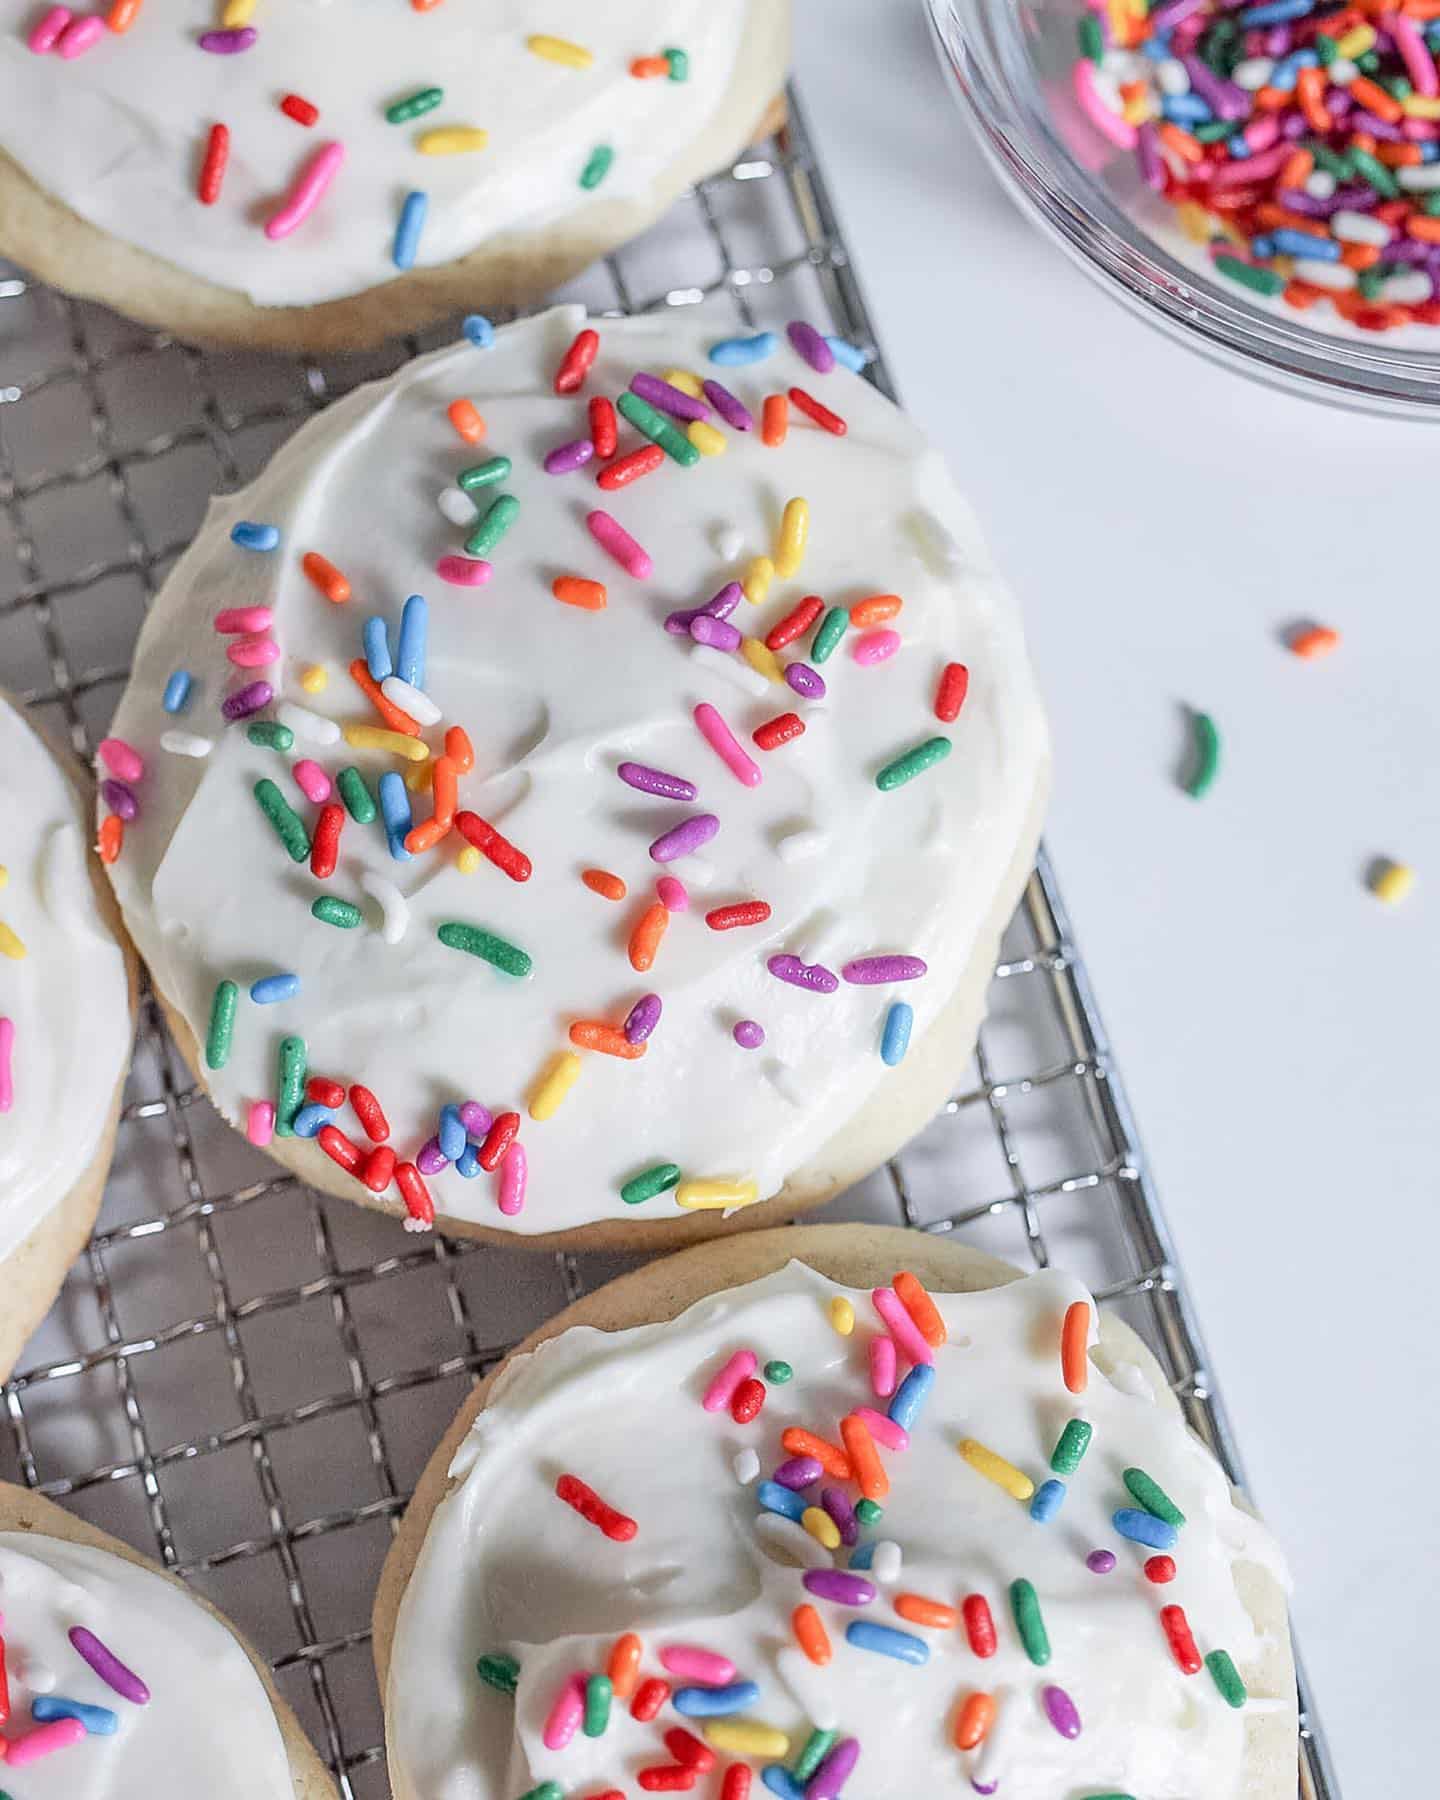 It’s cookie season, and my recipe for frosted sugar cookies is totally customizable. So you can easily turn these into holiday cookies. The recipe is up on The Daily Meal now 

#sugarcookies #sugarcookierecipe #sugarcookiesofinstagram #sugarcookiephotos #cookiephotography